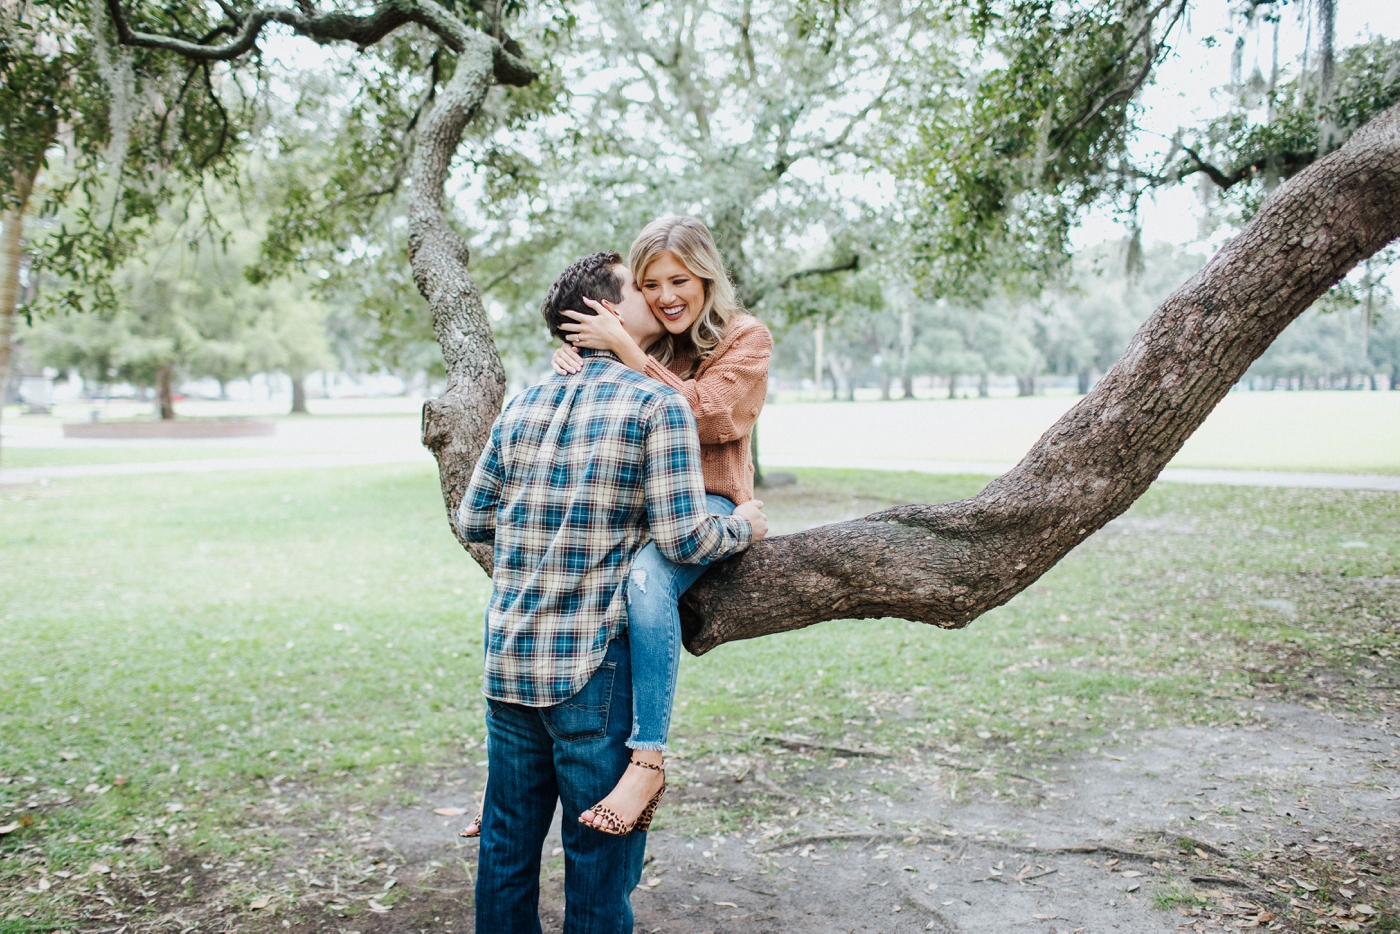 Macy & Matthew’s engagement session at Forsyth Park in Downtown Savannah | Izzy and Co.